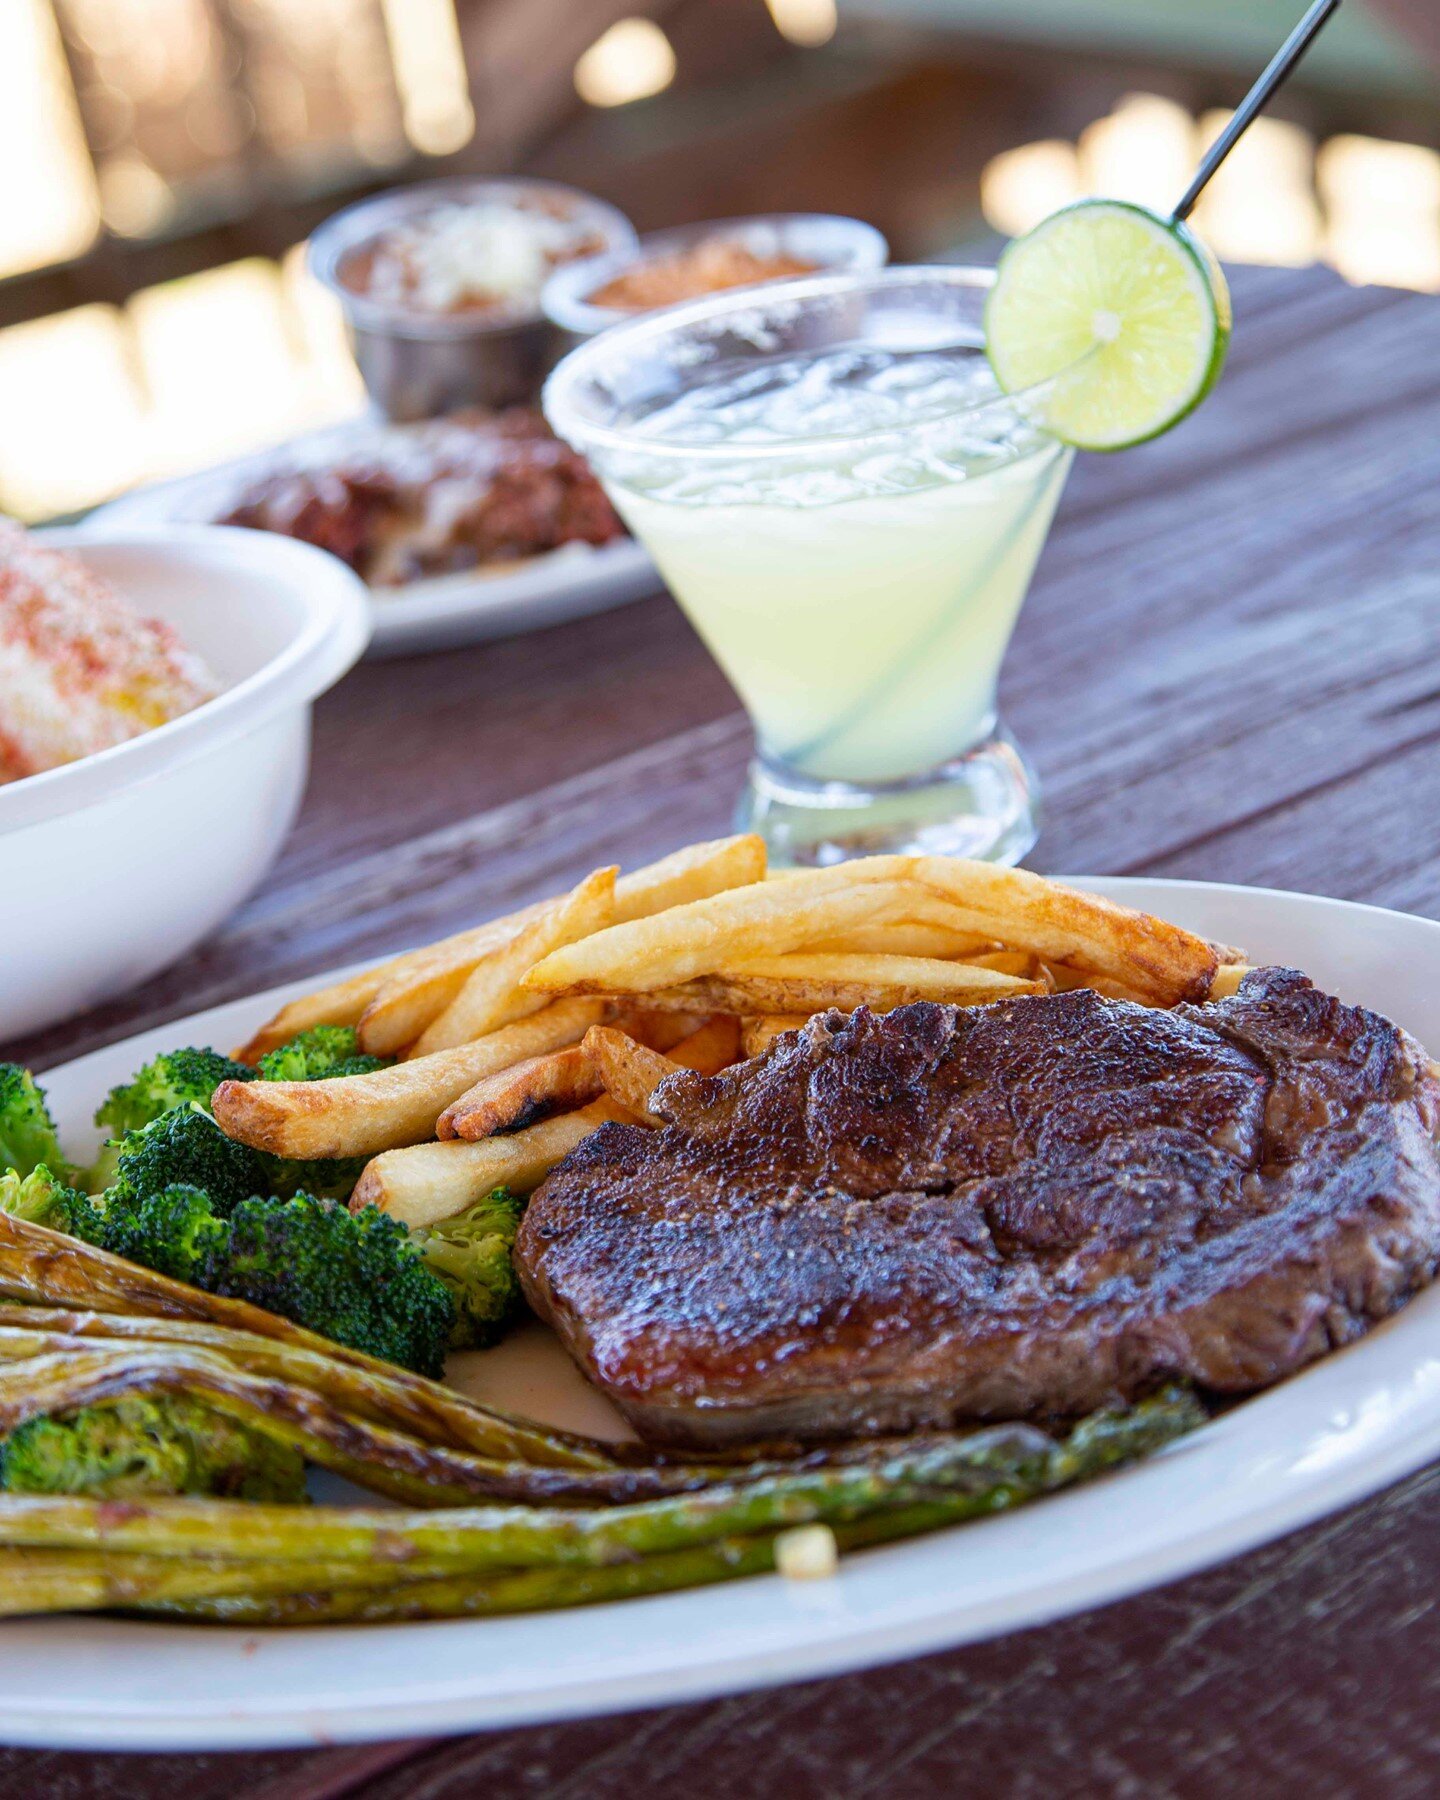 Always make time for the things you love, like Mexican food and margaritas 🥂

#ayetoronc #mexicanfood #comidamexicana #steak #steakdishes #sanfordnc #hollyspringsnc #margaritas #drinks